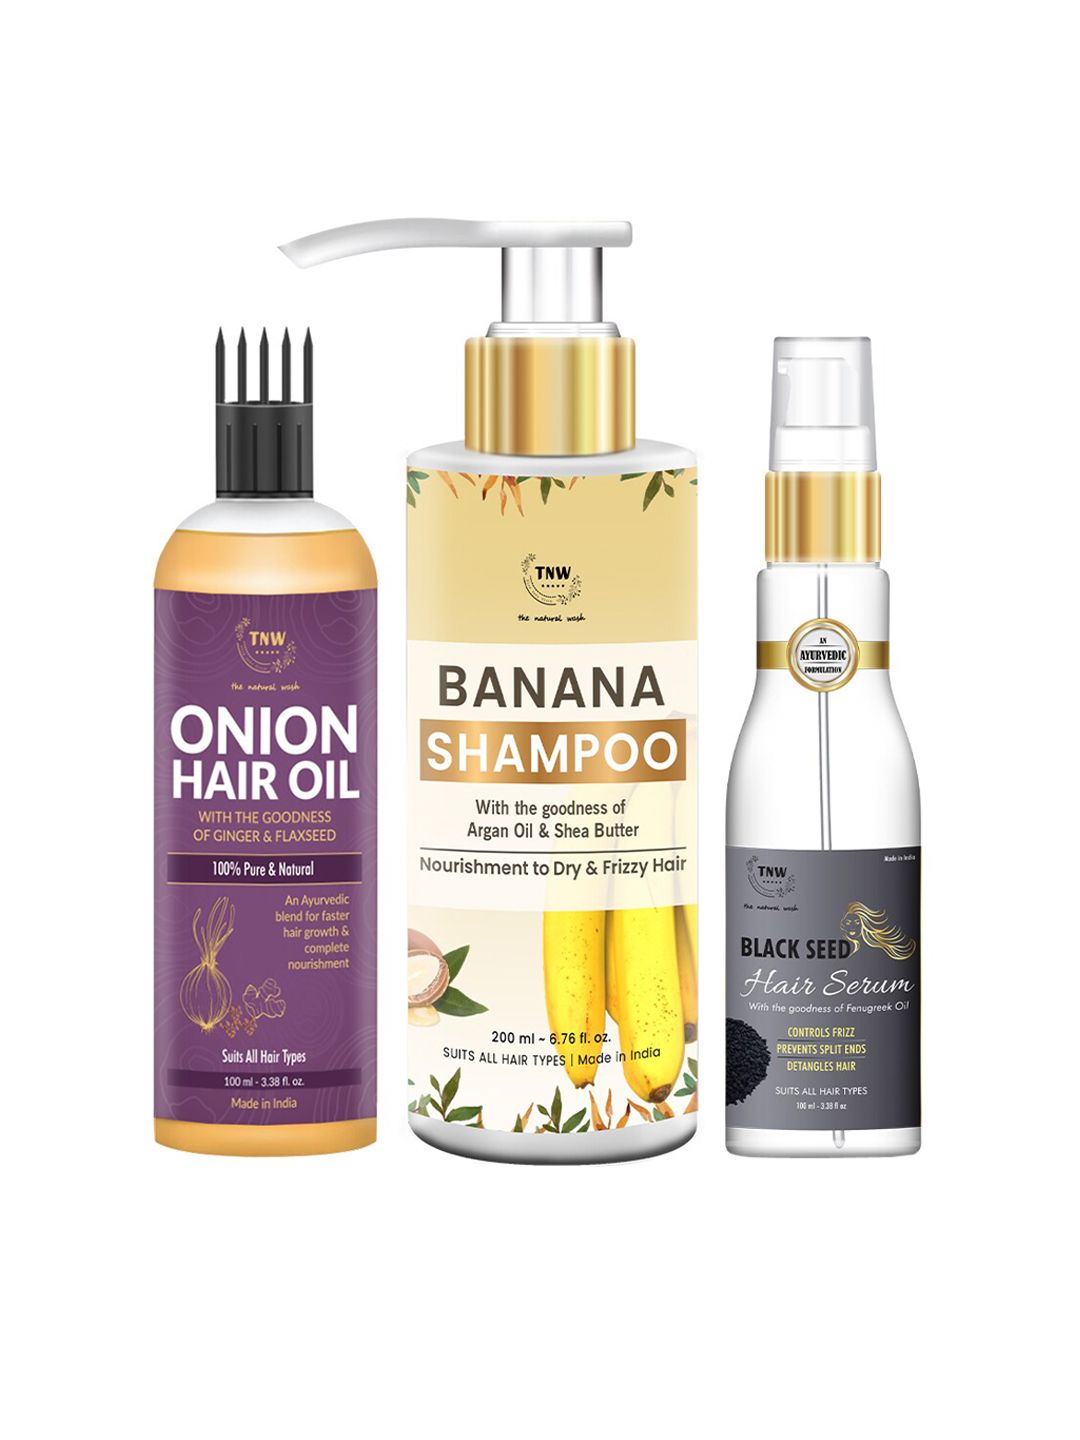 TNW the natural wash Onion Hair Oil With Blackseed Hair Serum & Banana Shampoo Price in India